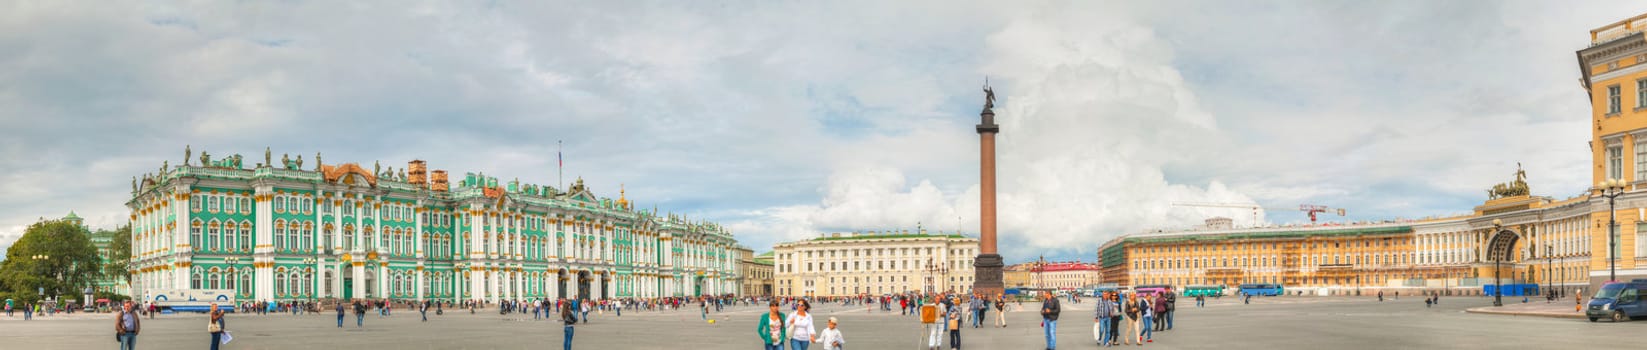 SAINT PETERSBURG, RUSSIA - AUGUST 25: The Alexander Column at Palace (Dvortsovaya) Square in St. Petersburg, Russia on August 25, 2012 with tourists. The monument was erected after the Russian victory in the war with Napoleon's France.